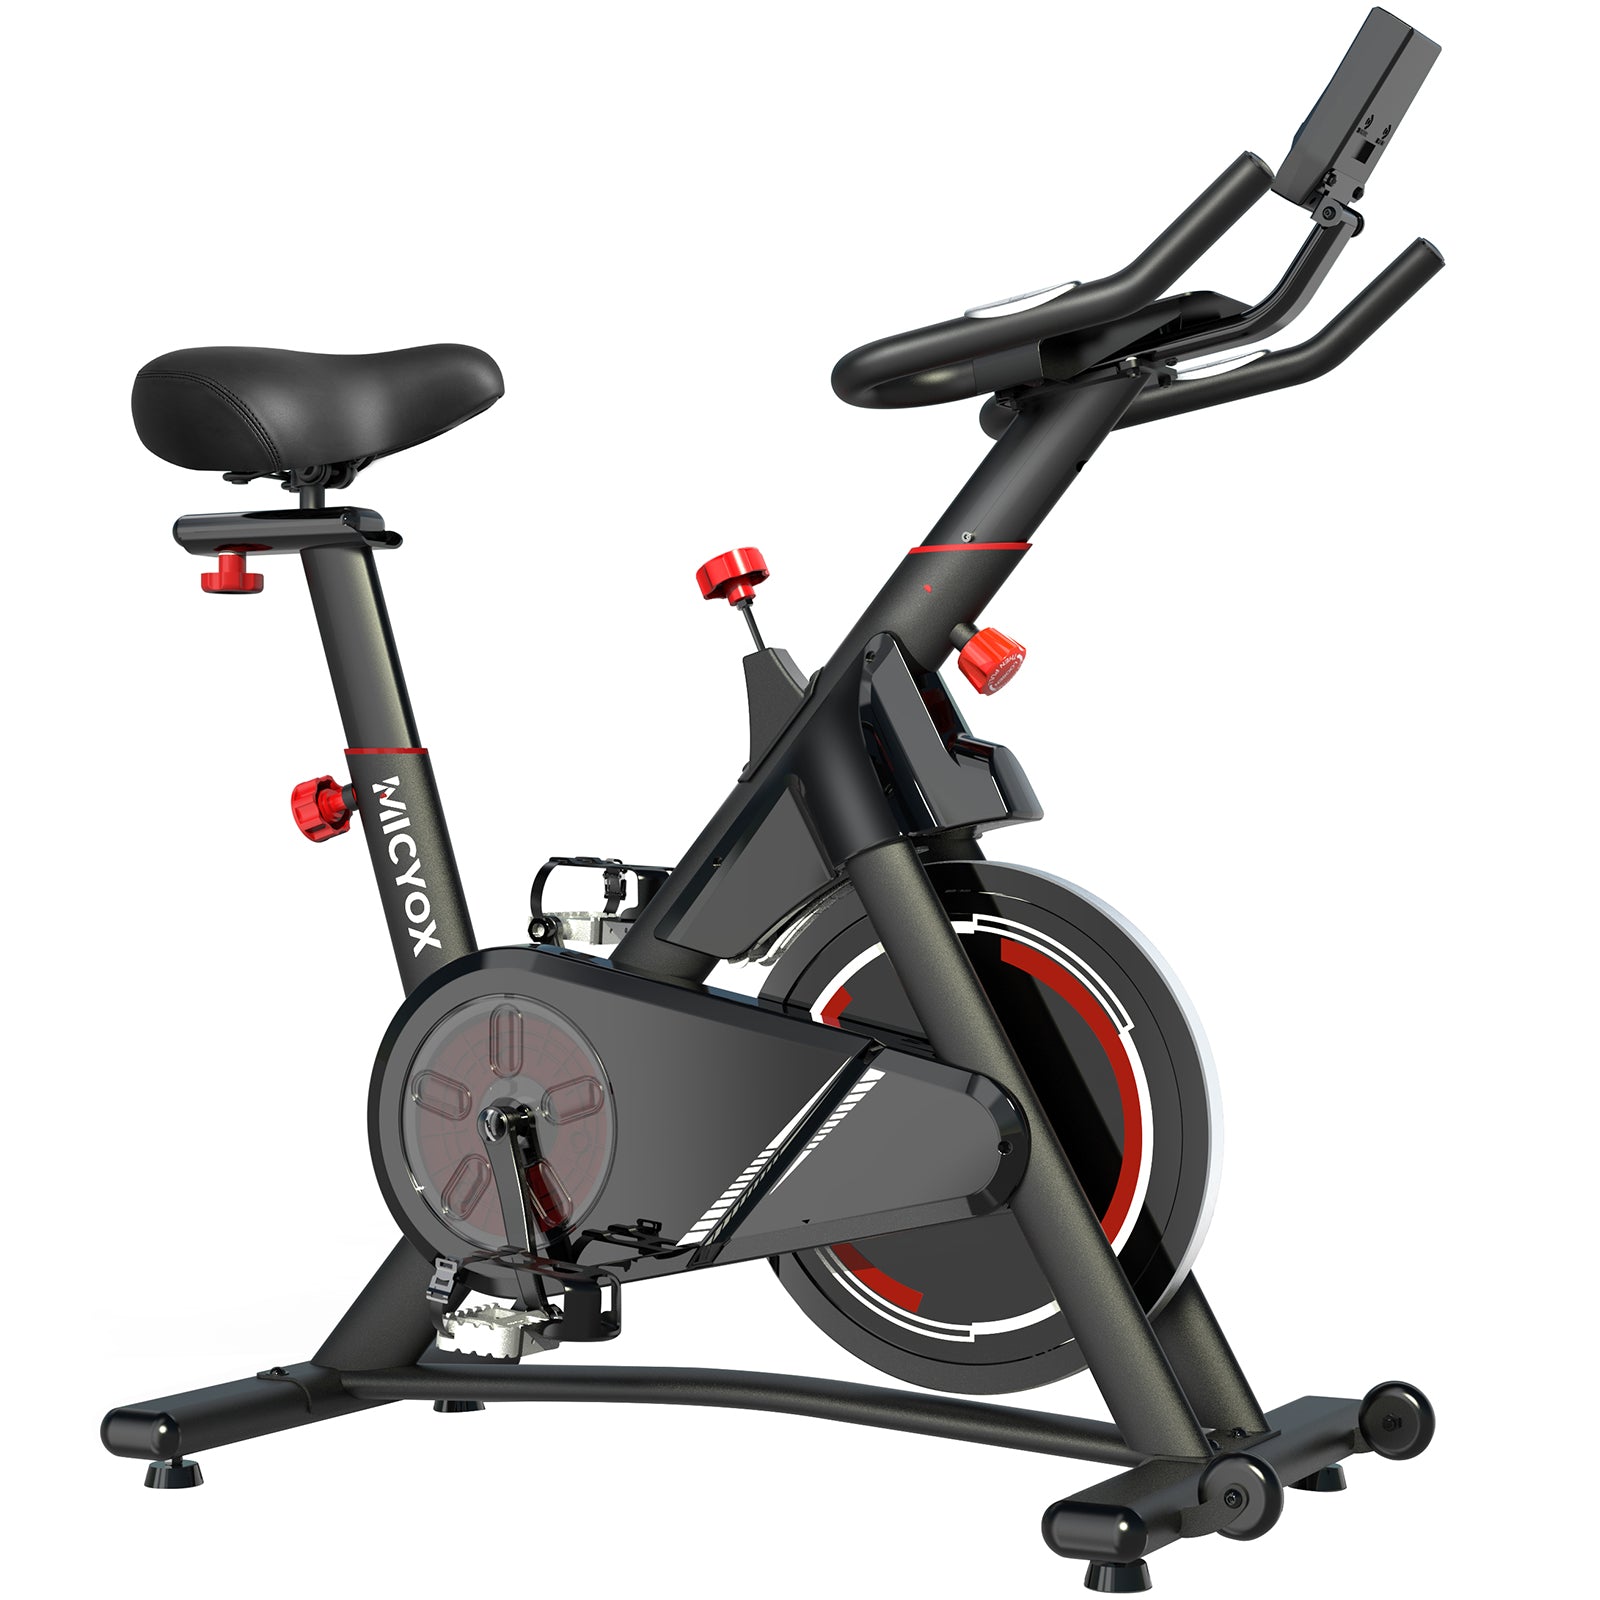 Micyox MX619 Exercise Bike Magnetic Resistance Indoor Cycling Bike